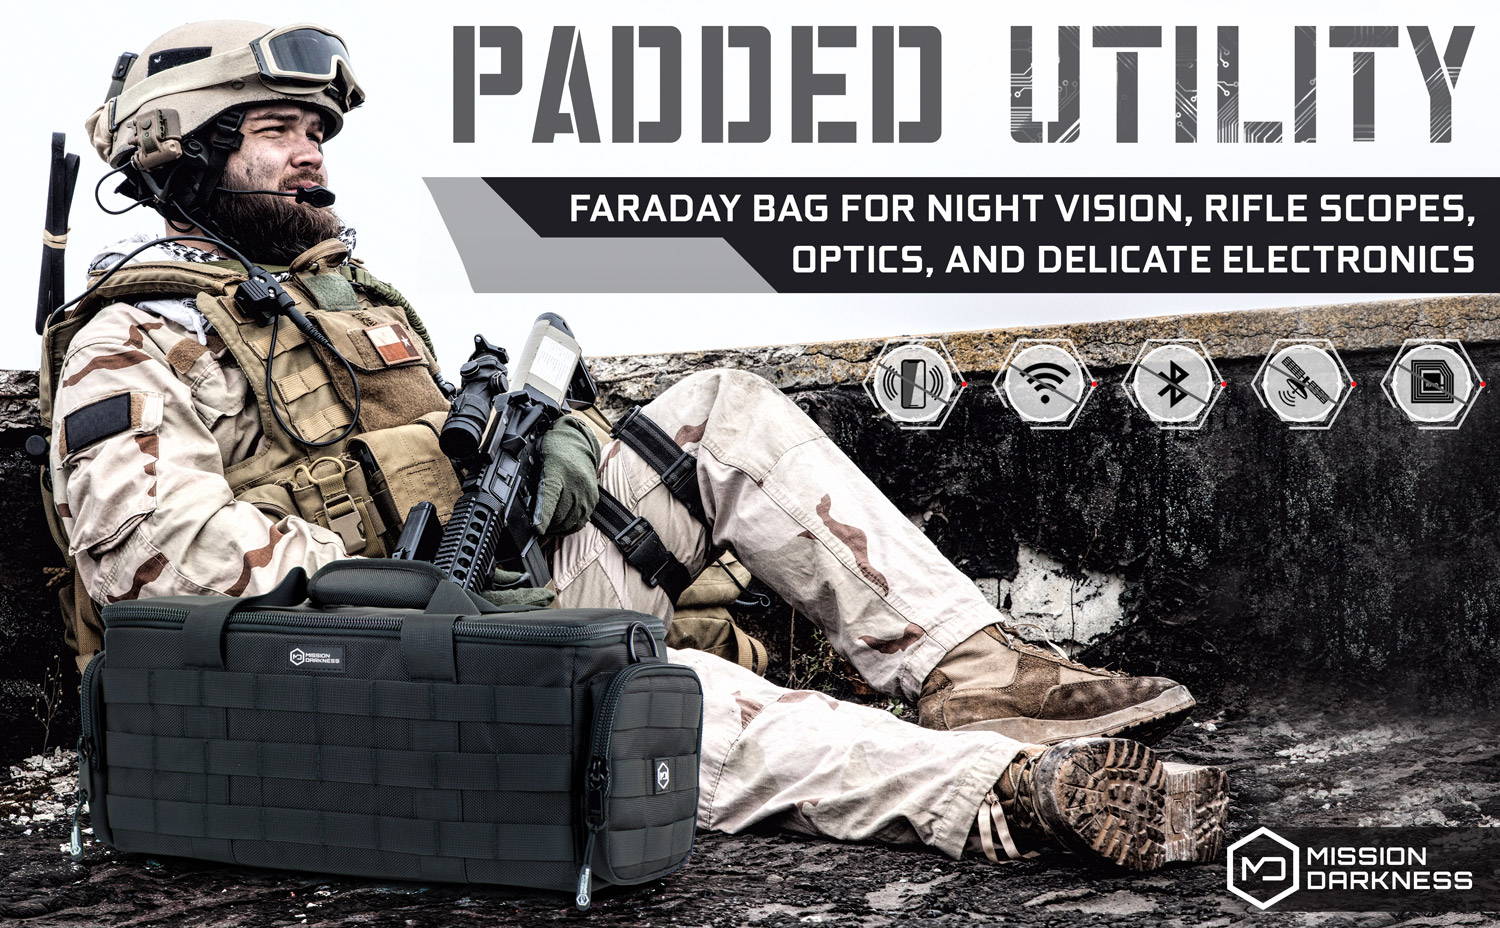 Mission Darkness Padded Utility Faraday bag protect delilcate electronics from EMPs and wireless signals